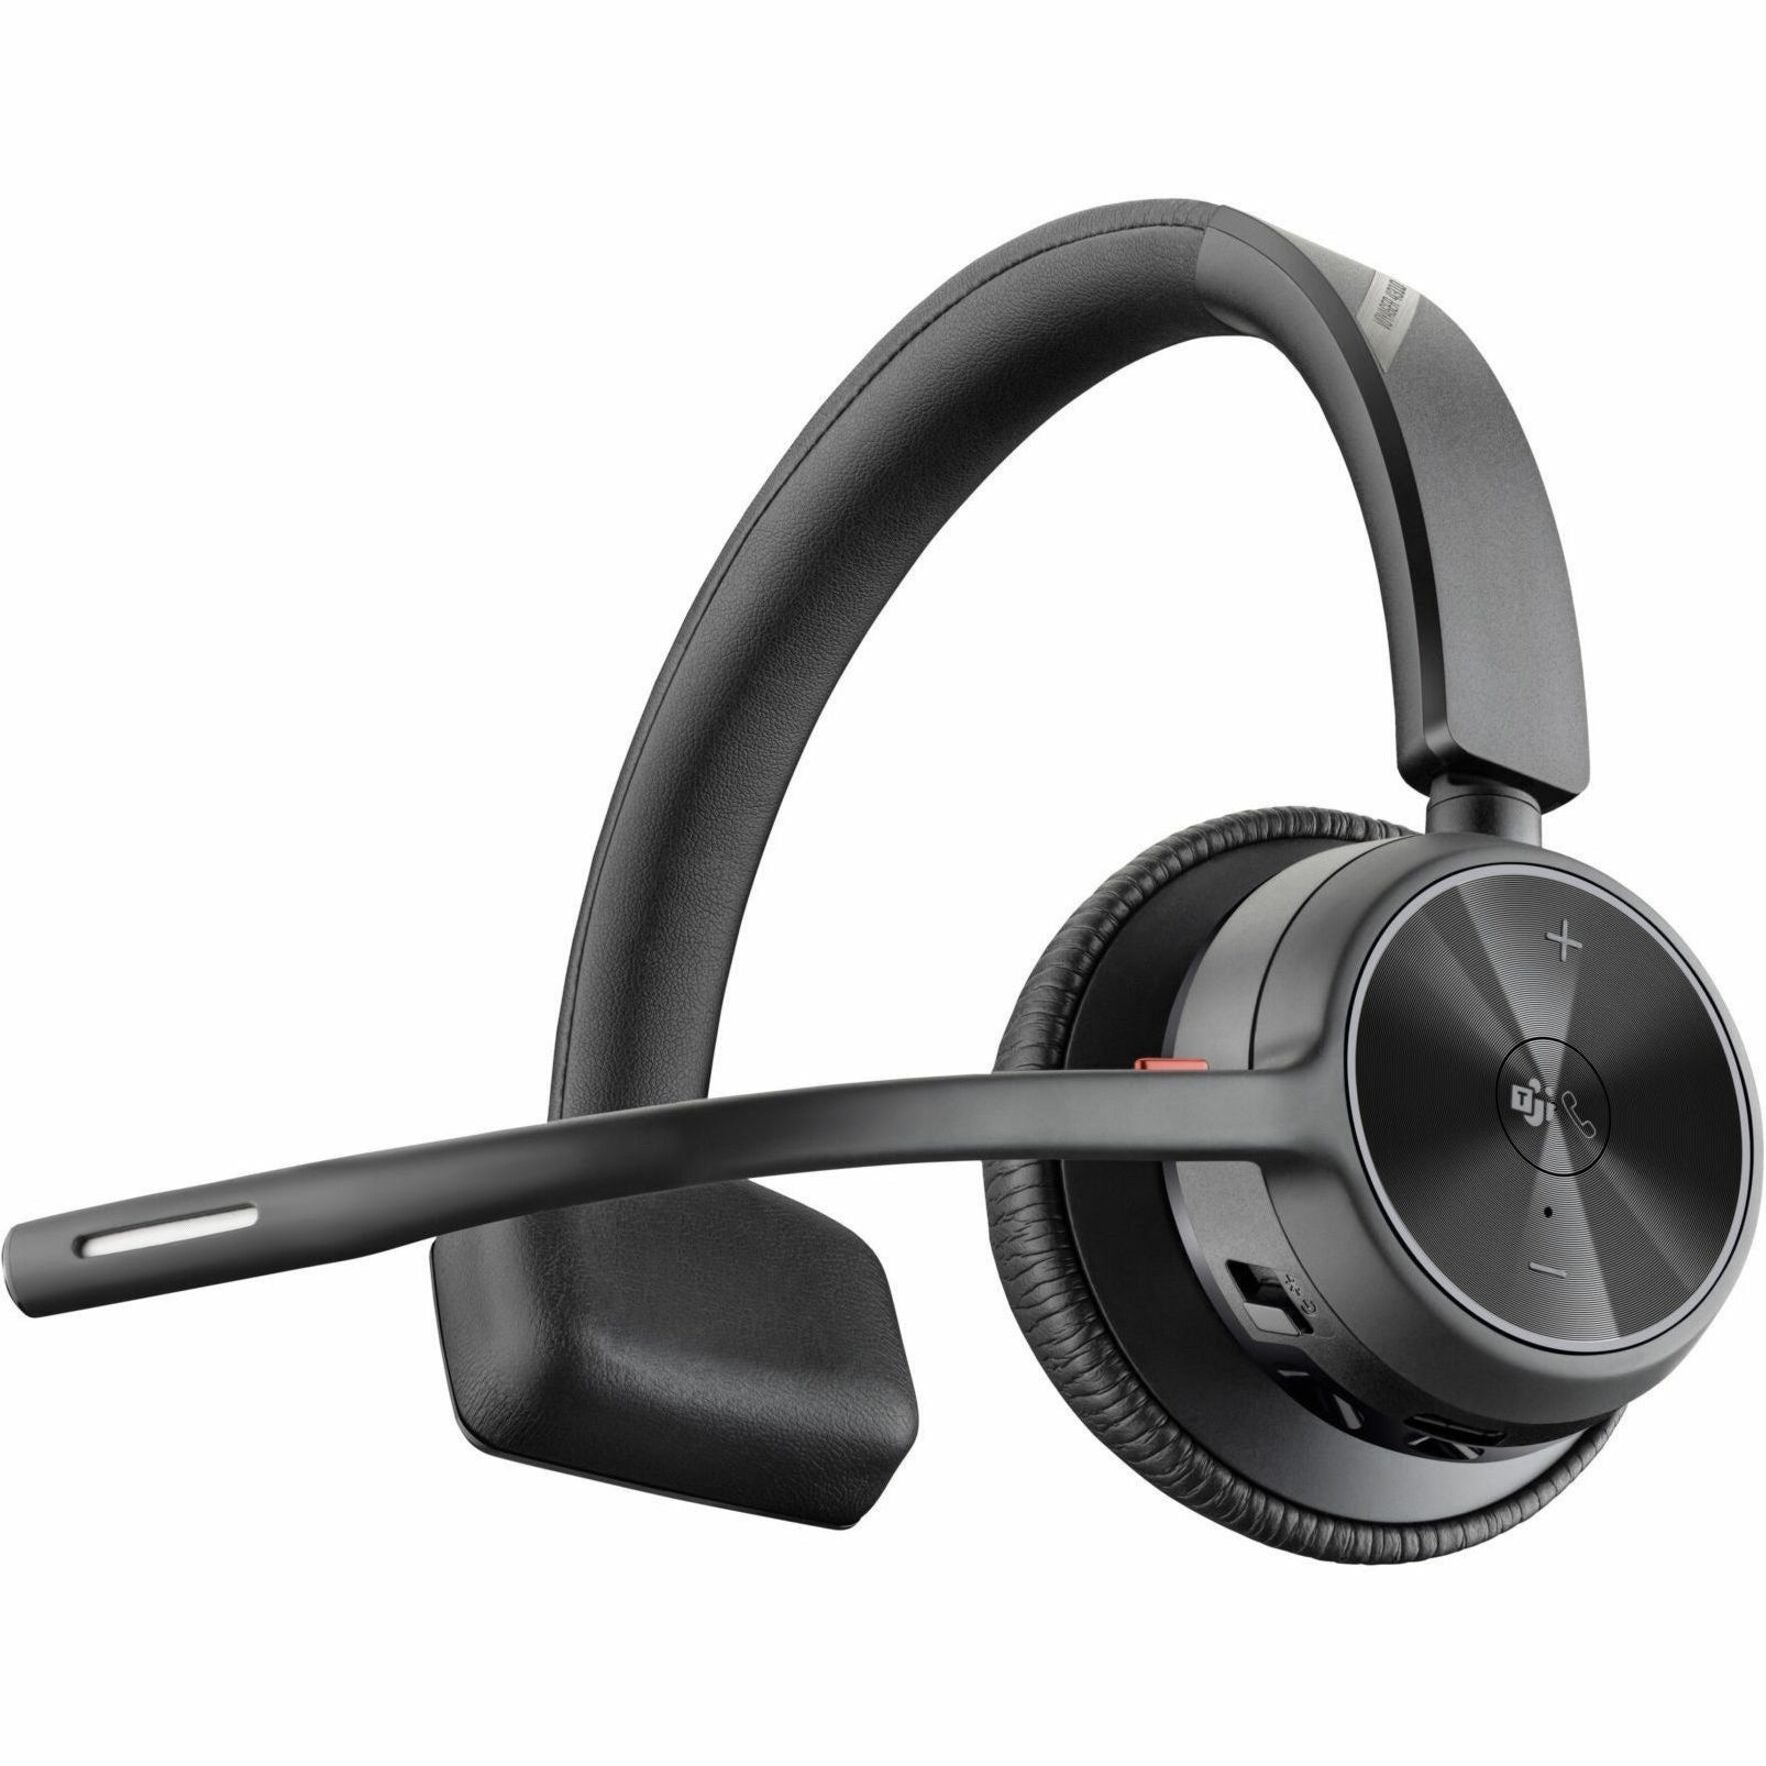 Poly 77Y91AA Voyager 4310 Microsoft Teams Certified USB-A Headset +BT700 dongle, Mono, Wireless Bluetooth 5.1, Noise Canceling, 2 Year Warranty